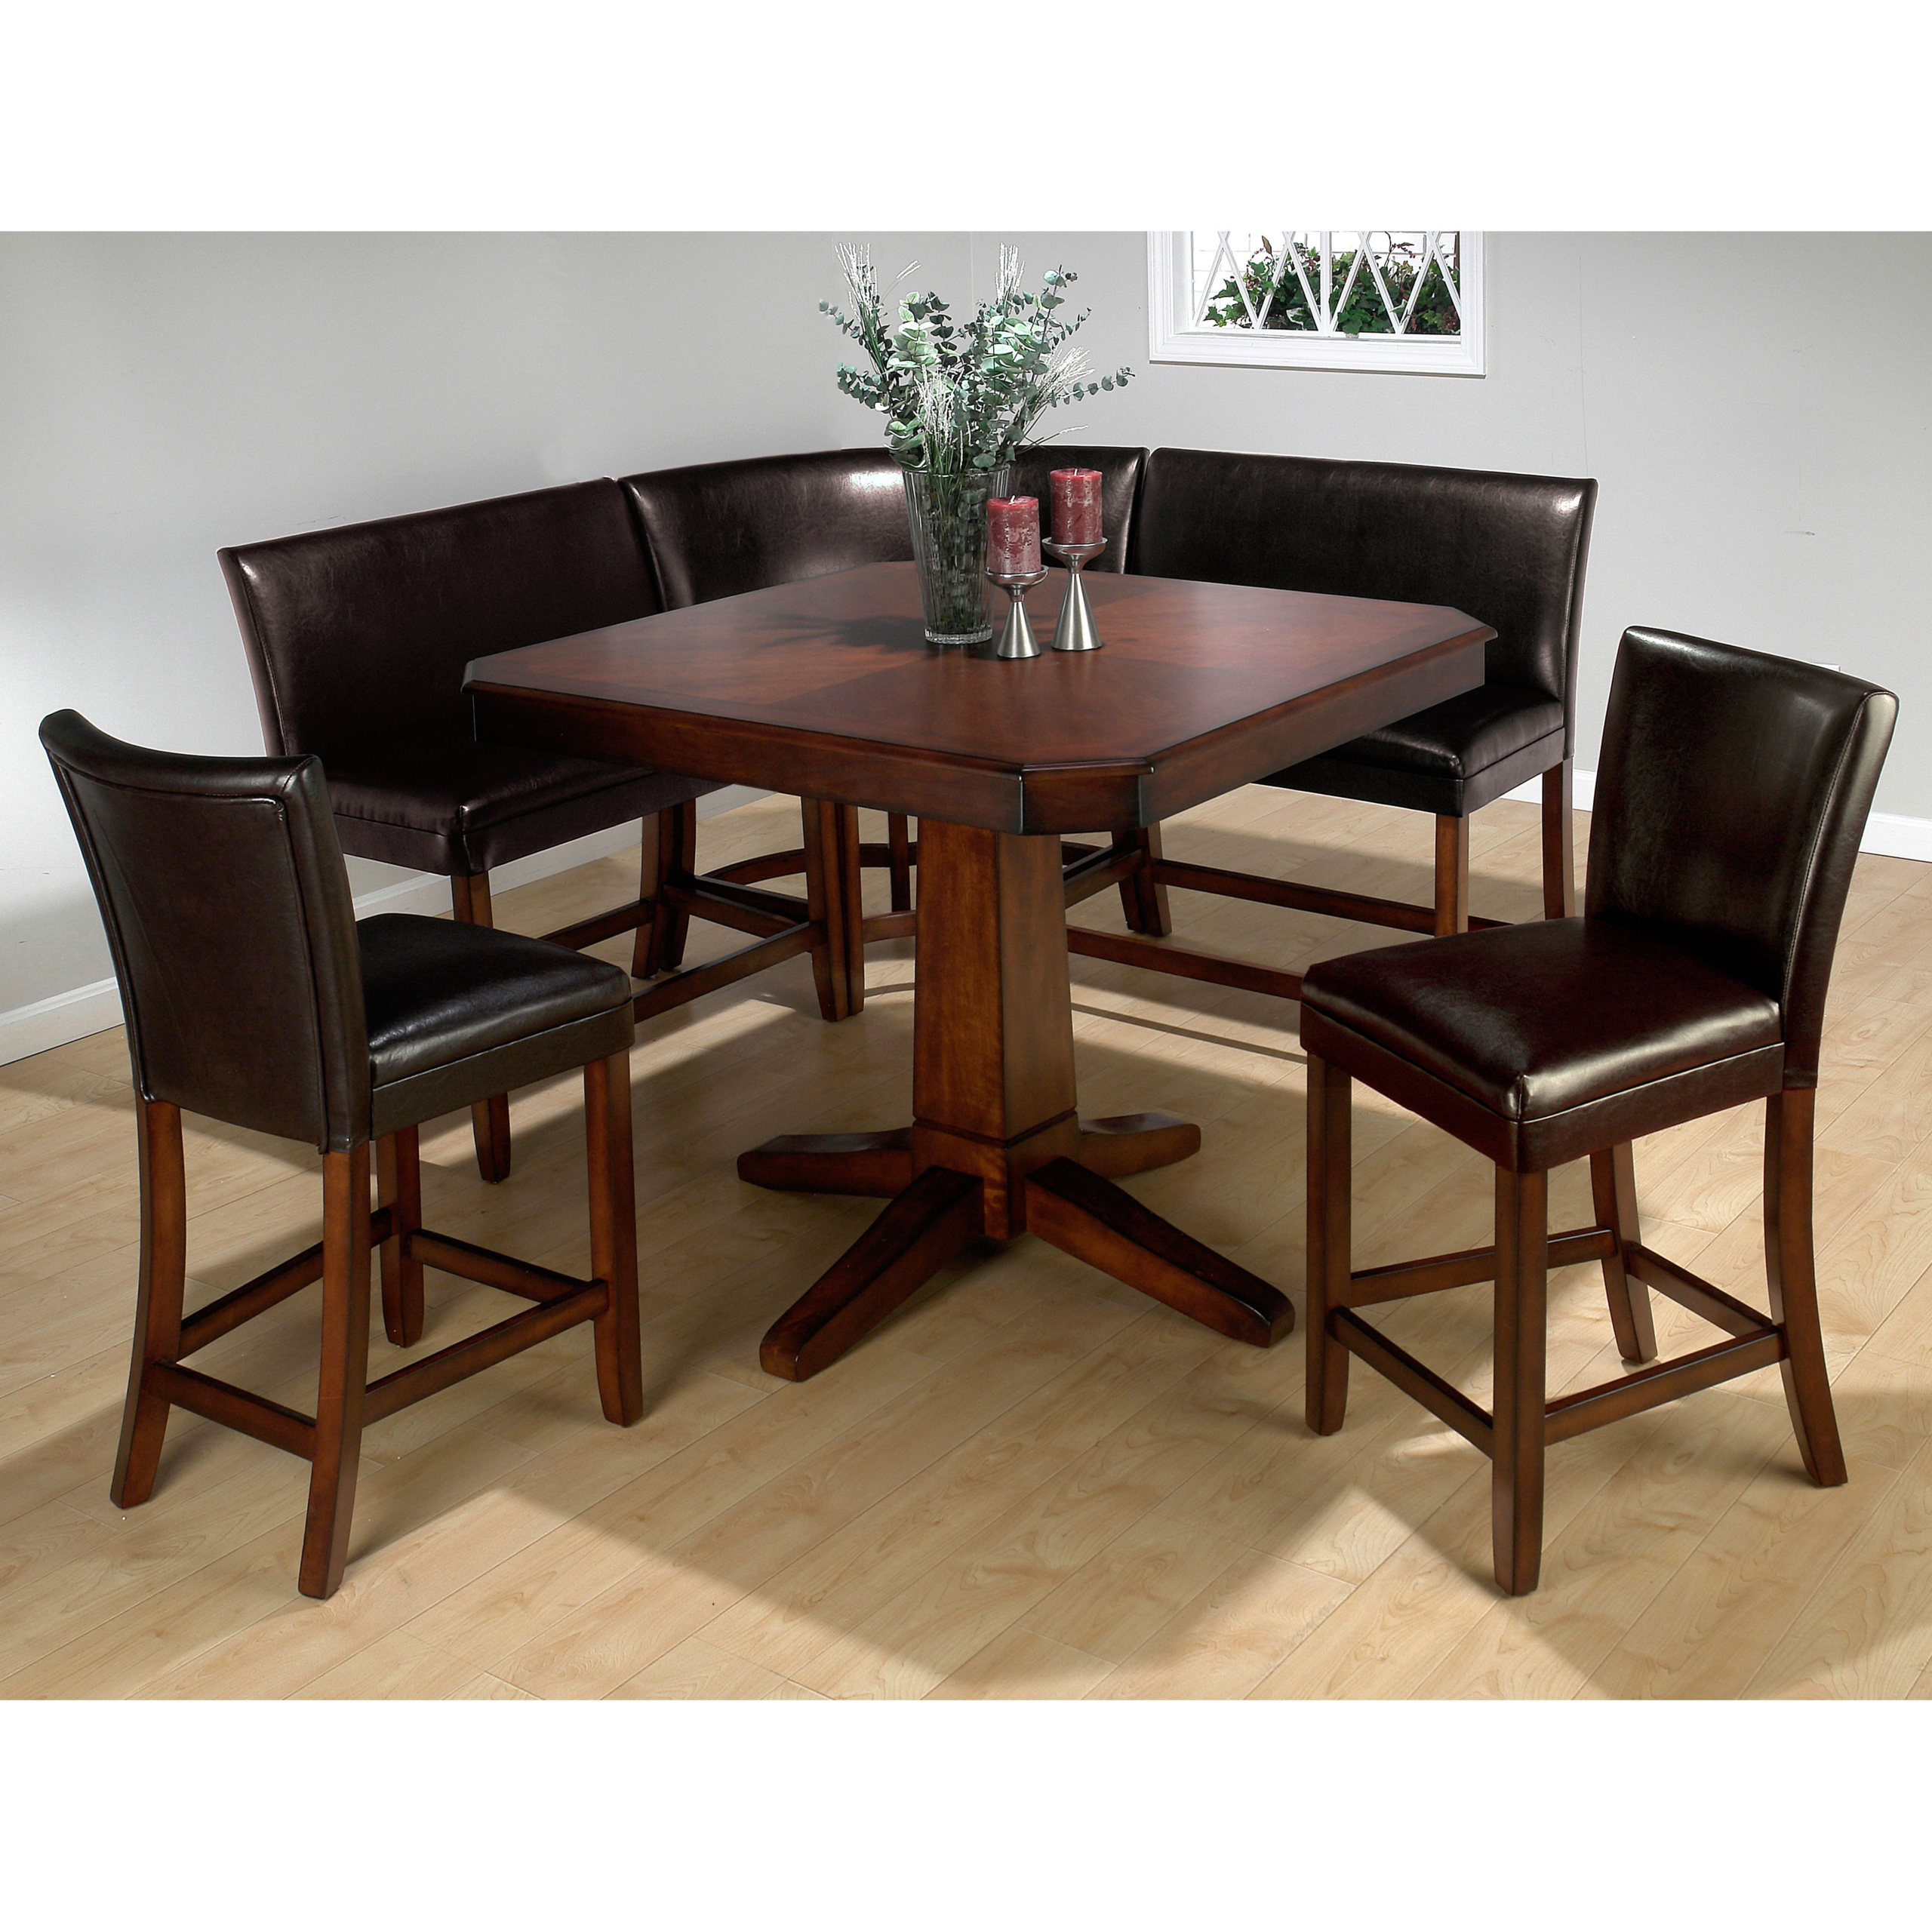 Jofran Chadwick Counter Height Table With Corner Bench And 2 Side Chairs Modern Dining Tables